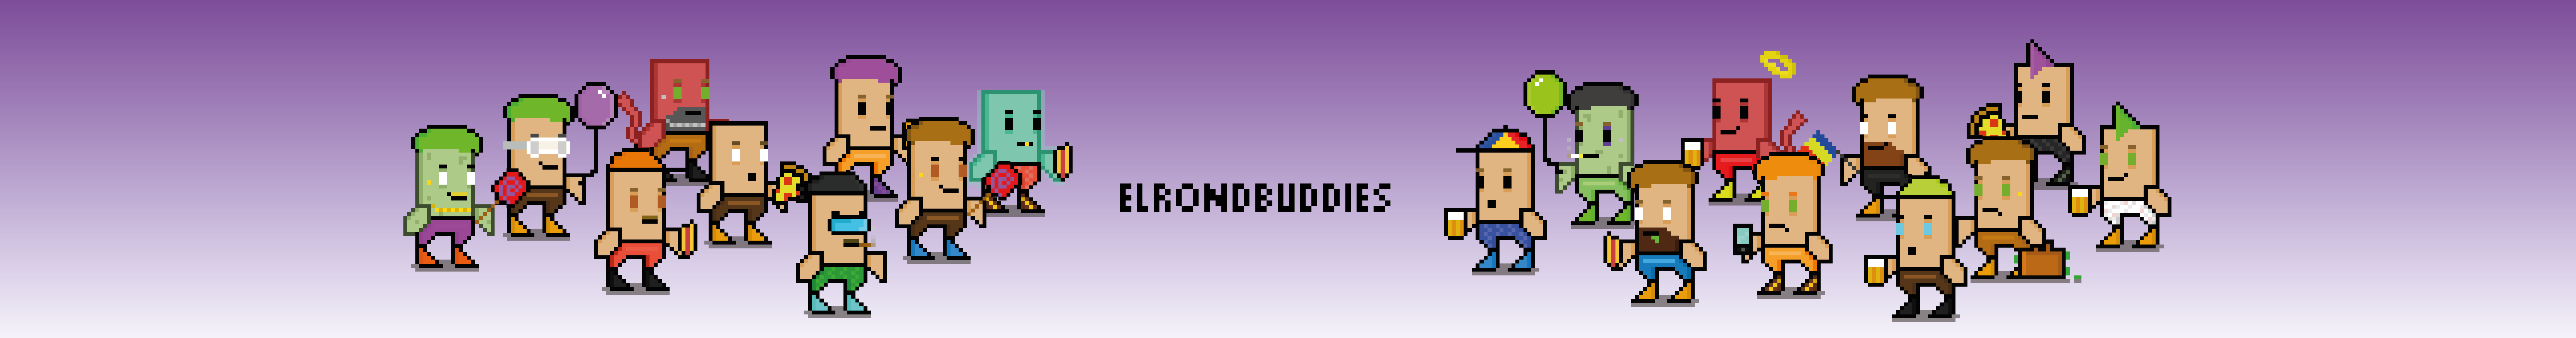 Profile banner of collection ElrondBuddies